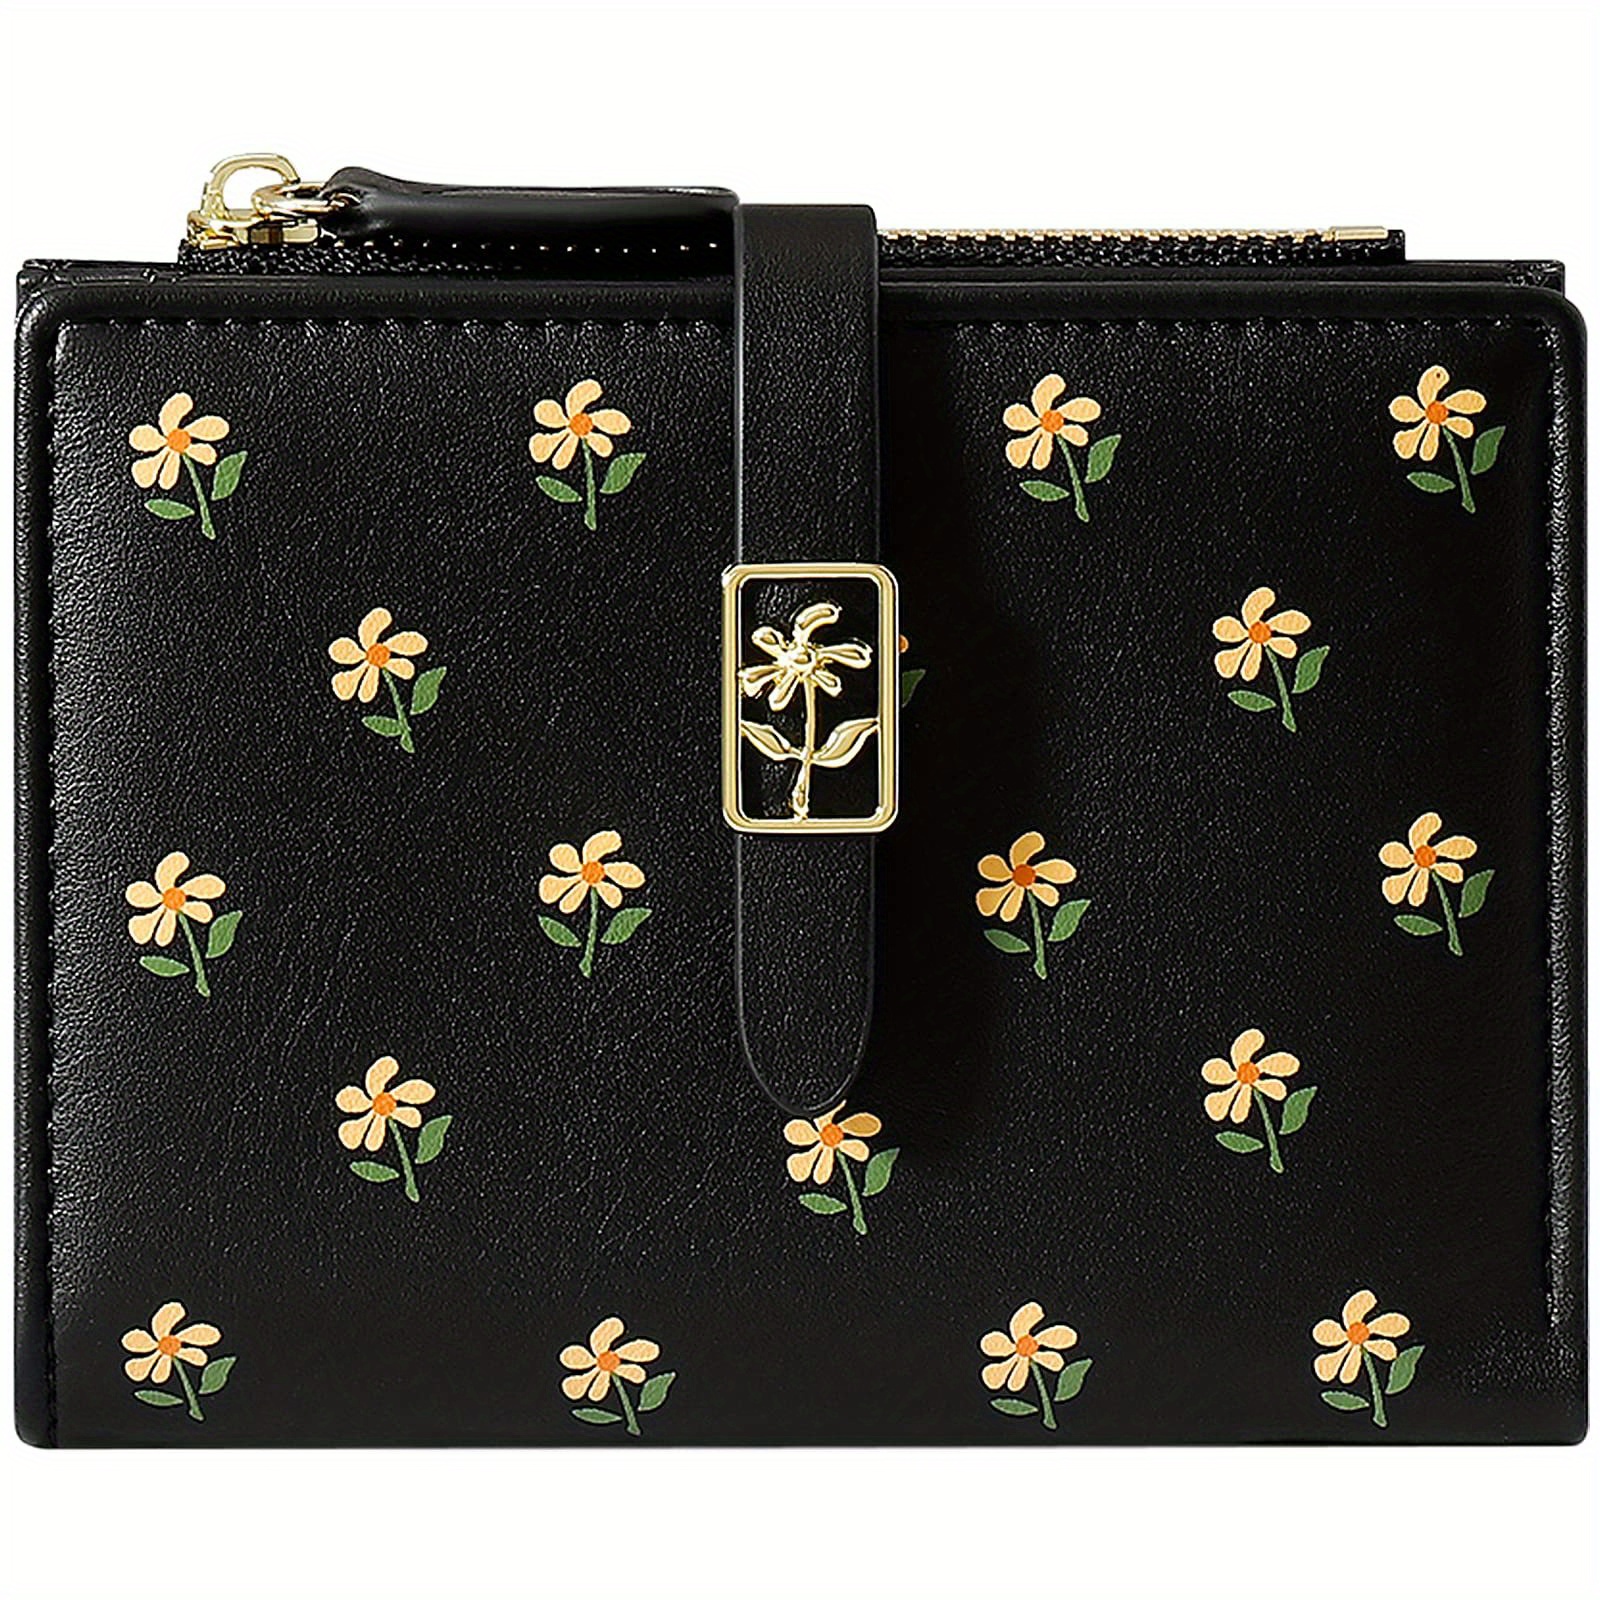 COACH Small Wallet With Cross Stitch Floral Print